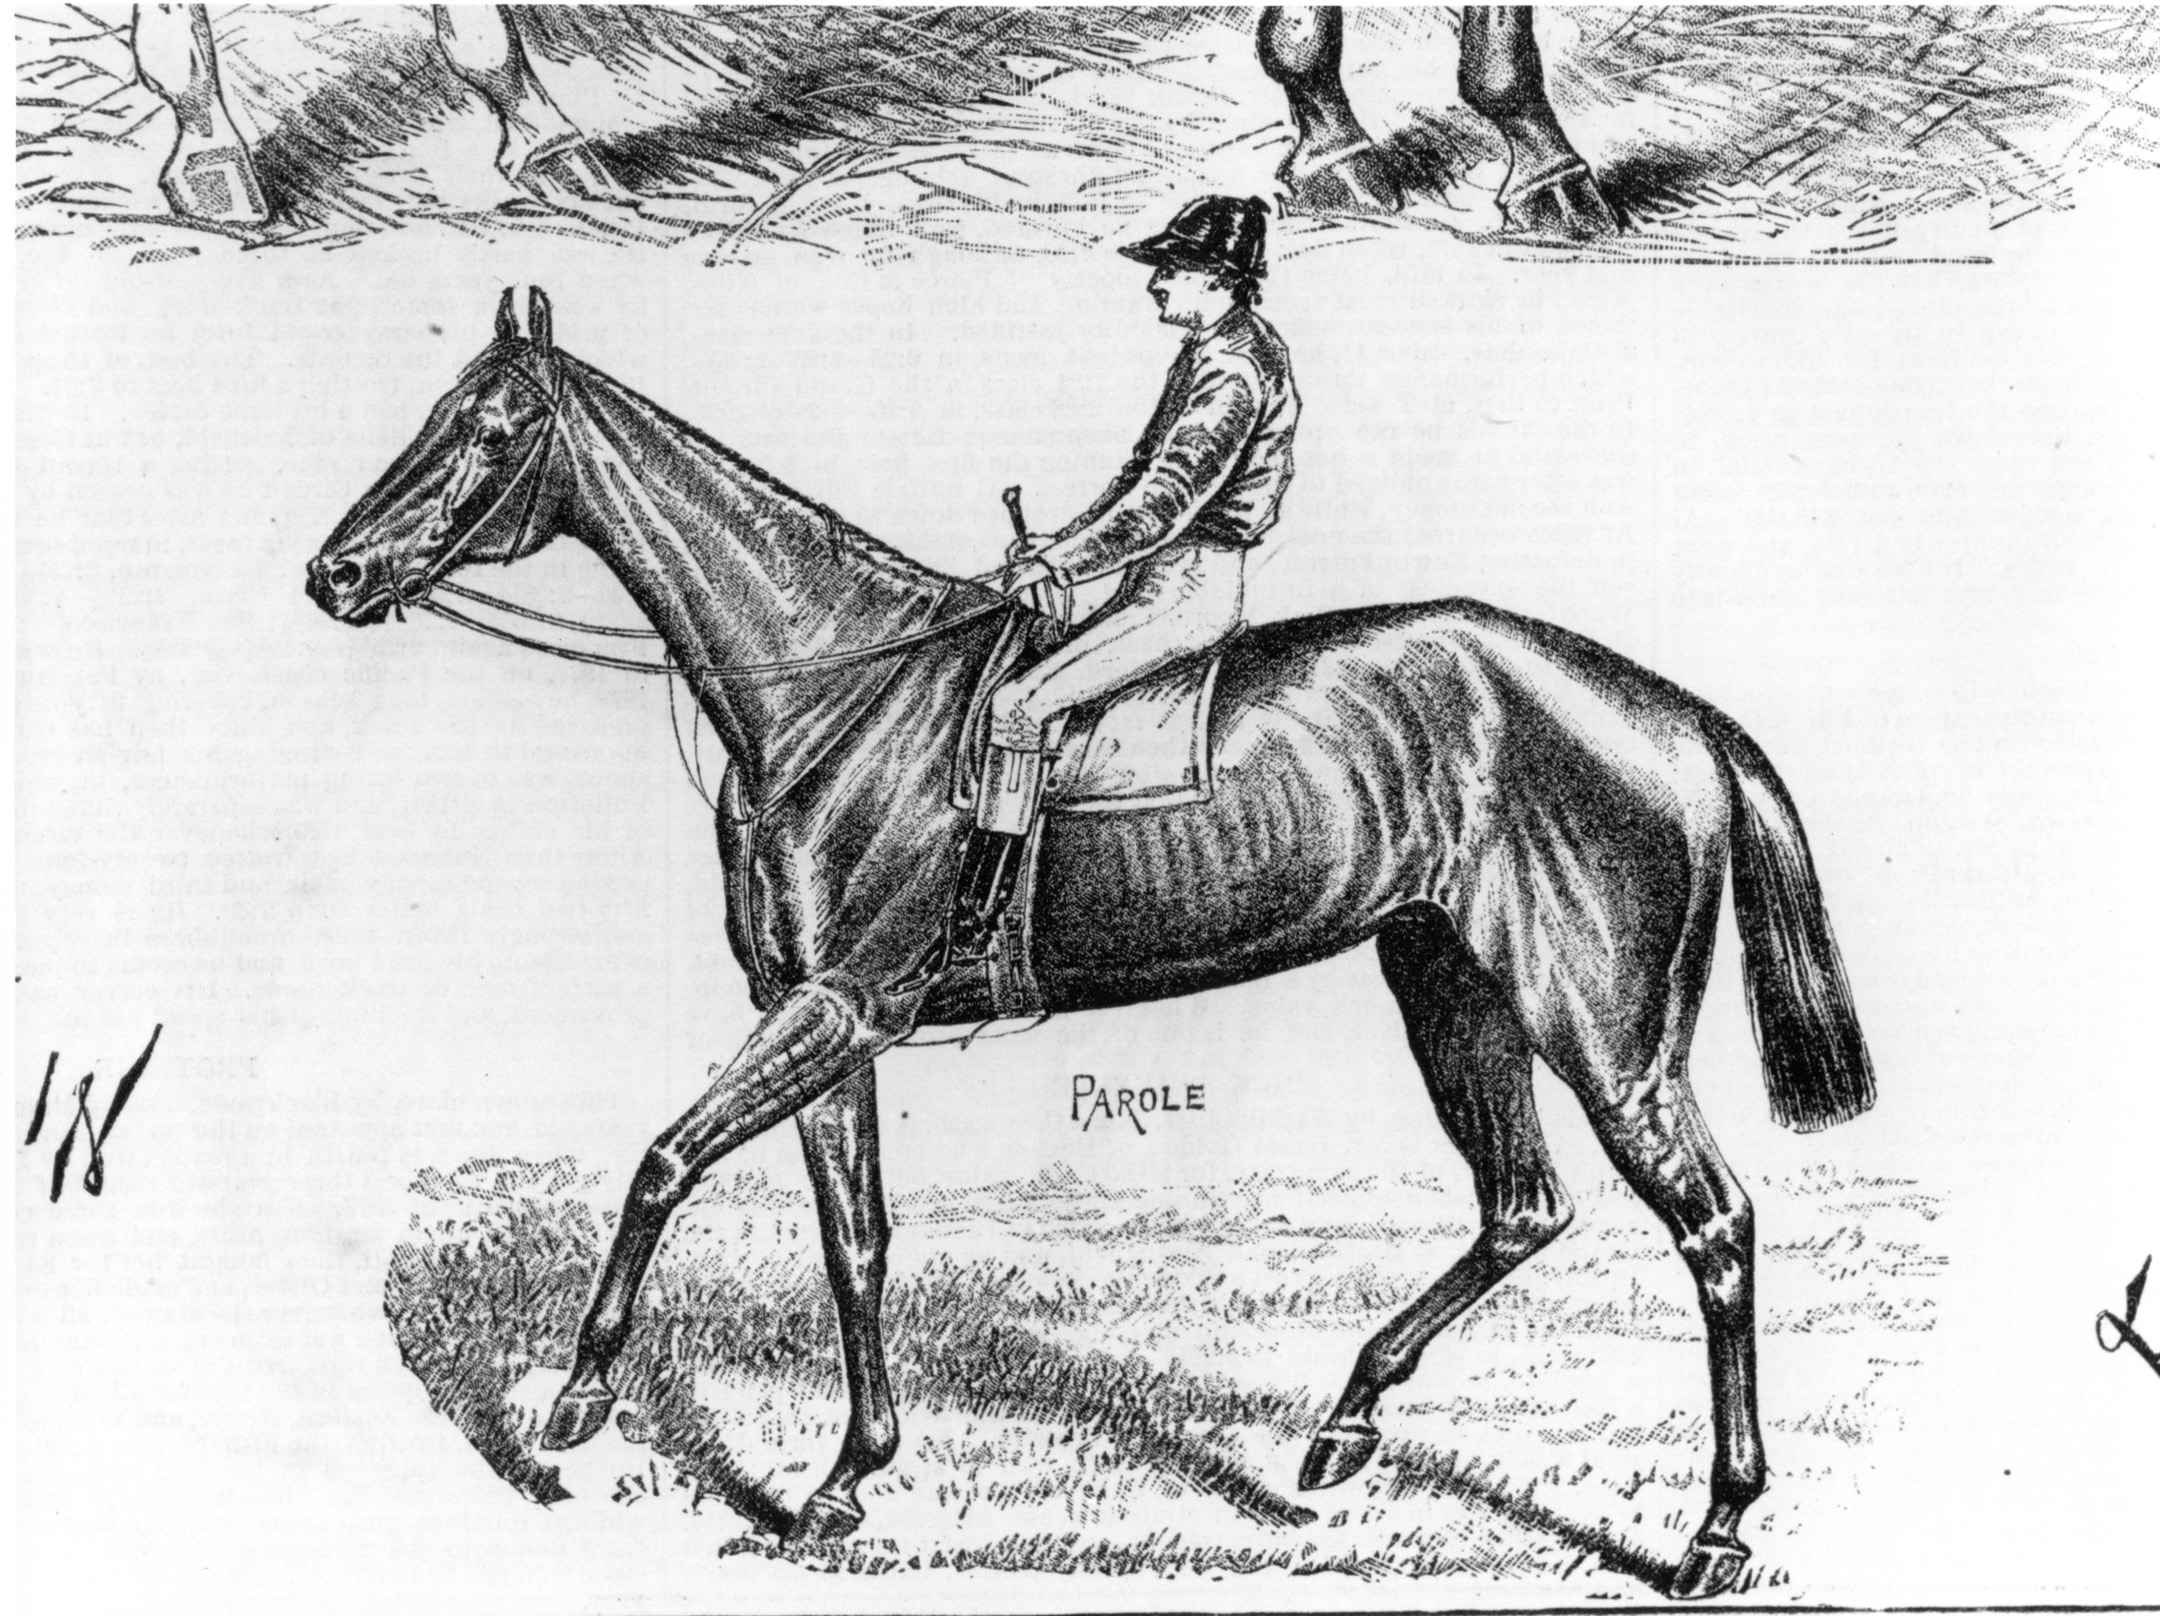 An illustration of Parole (Keeneland Library Collection/Museum Collection)